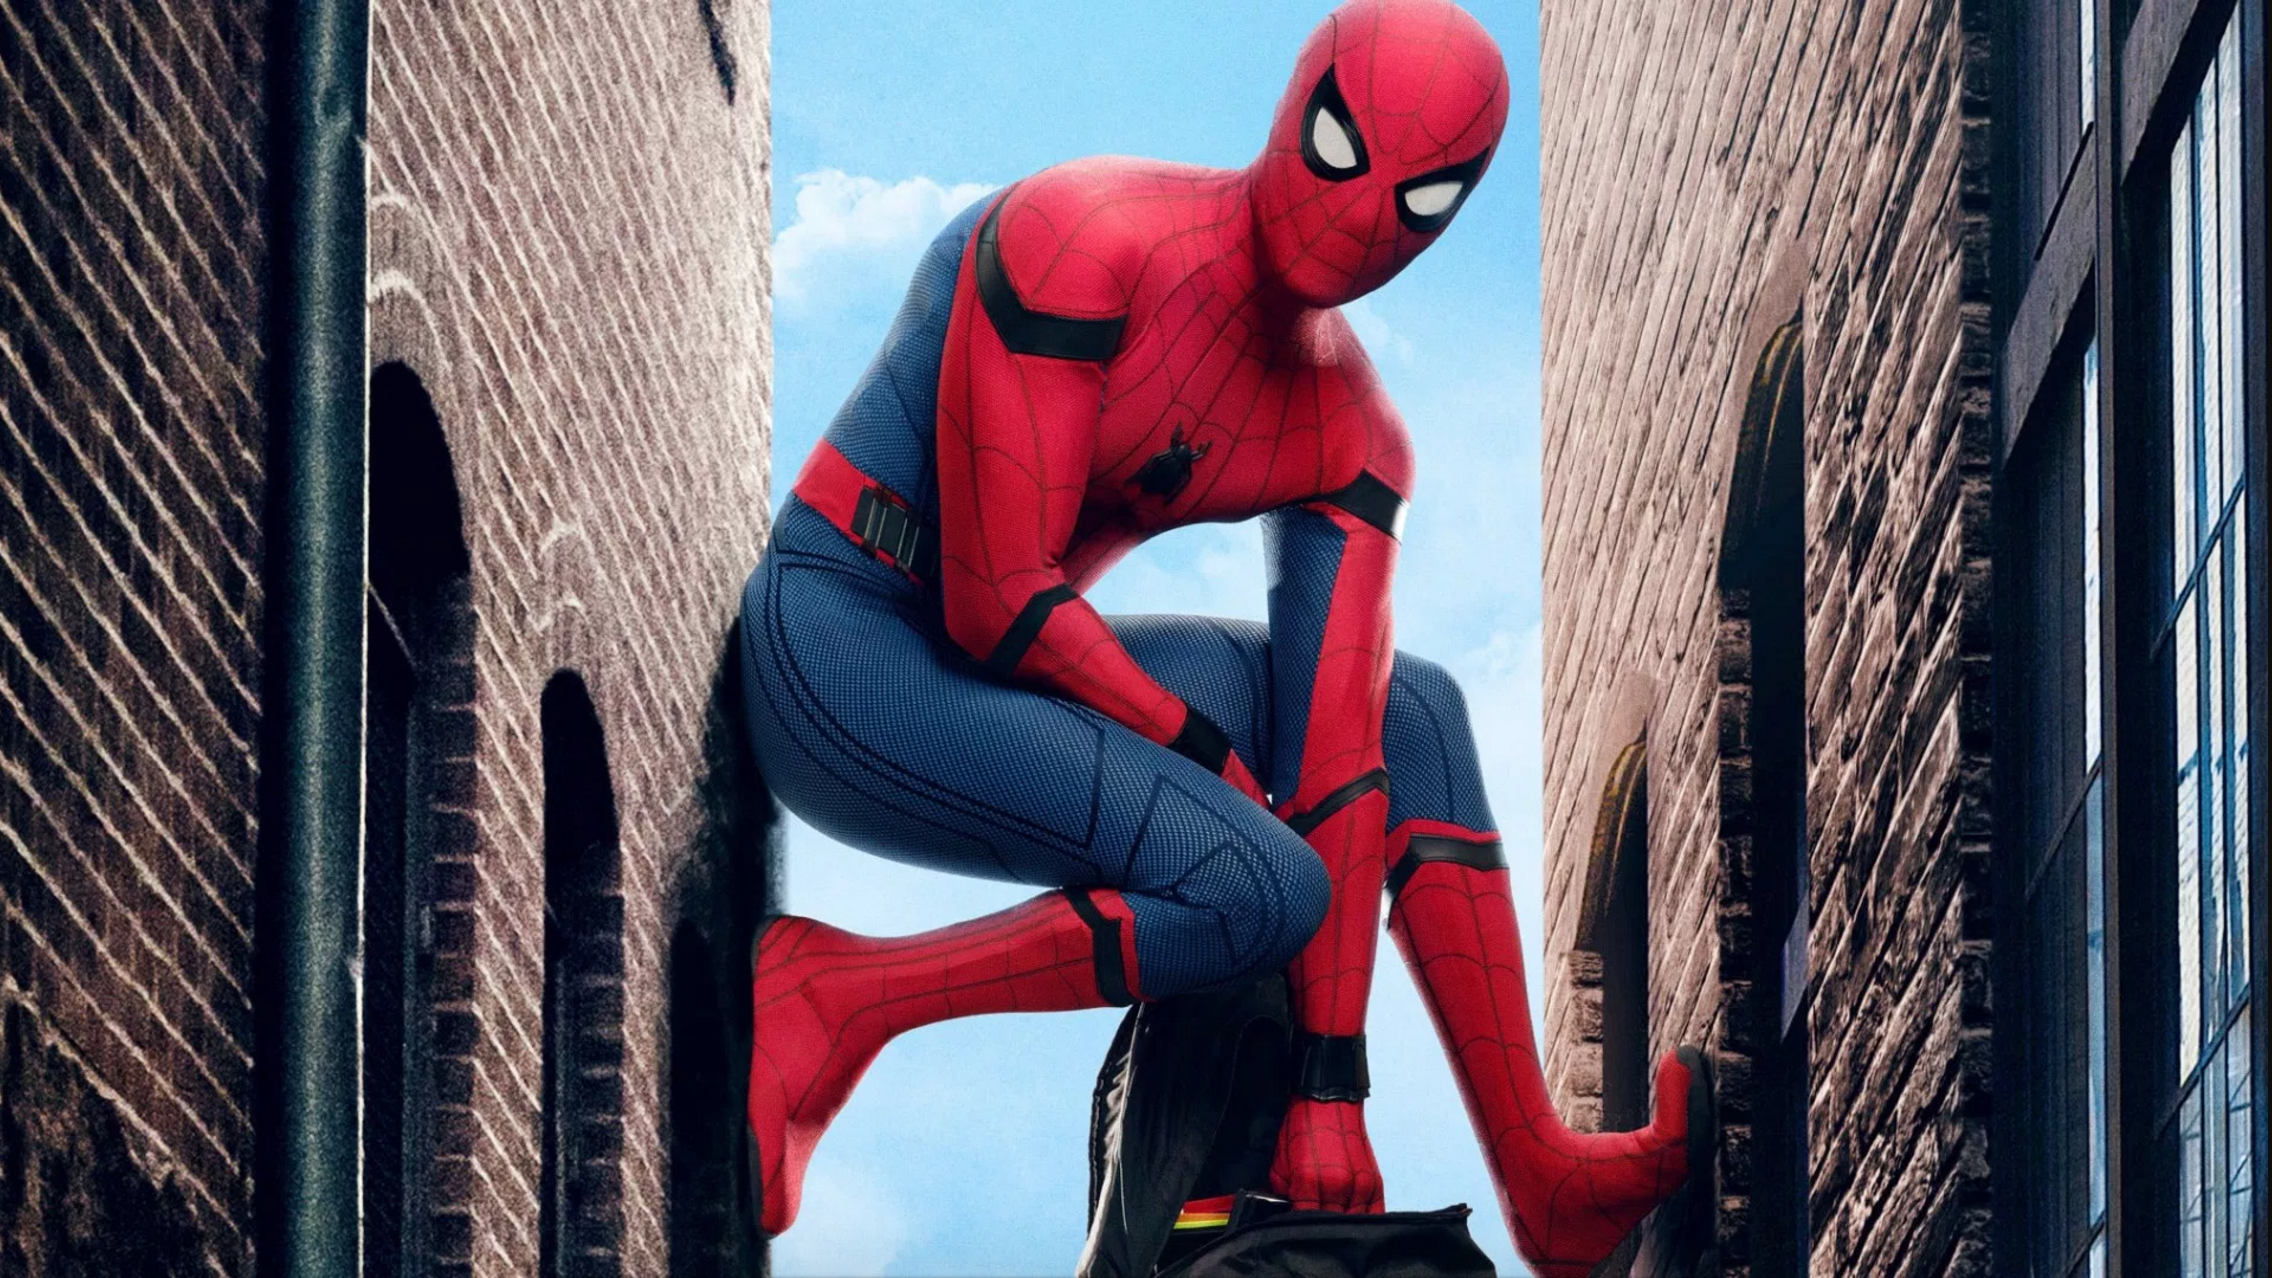 Spiderman Homecoming Chinese Poster Wallpapers